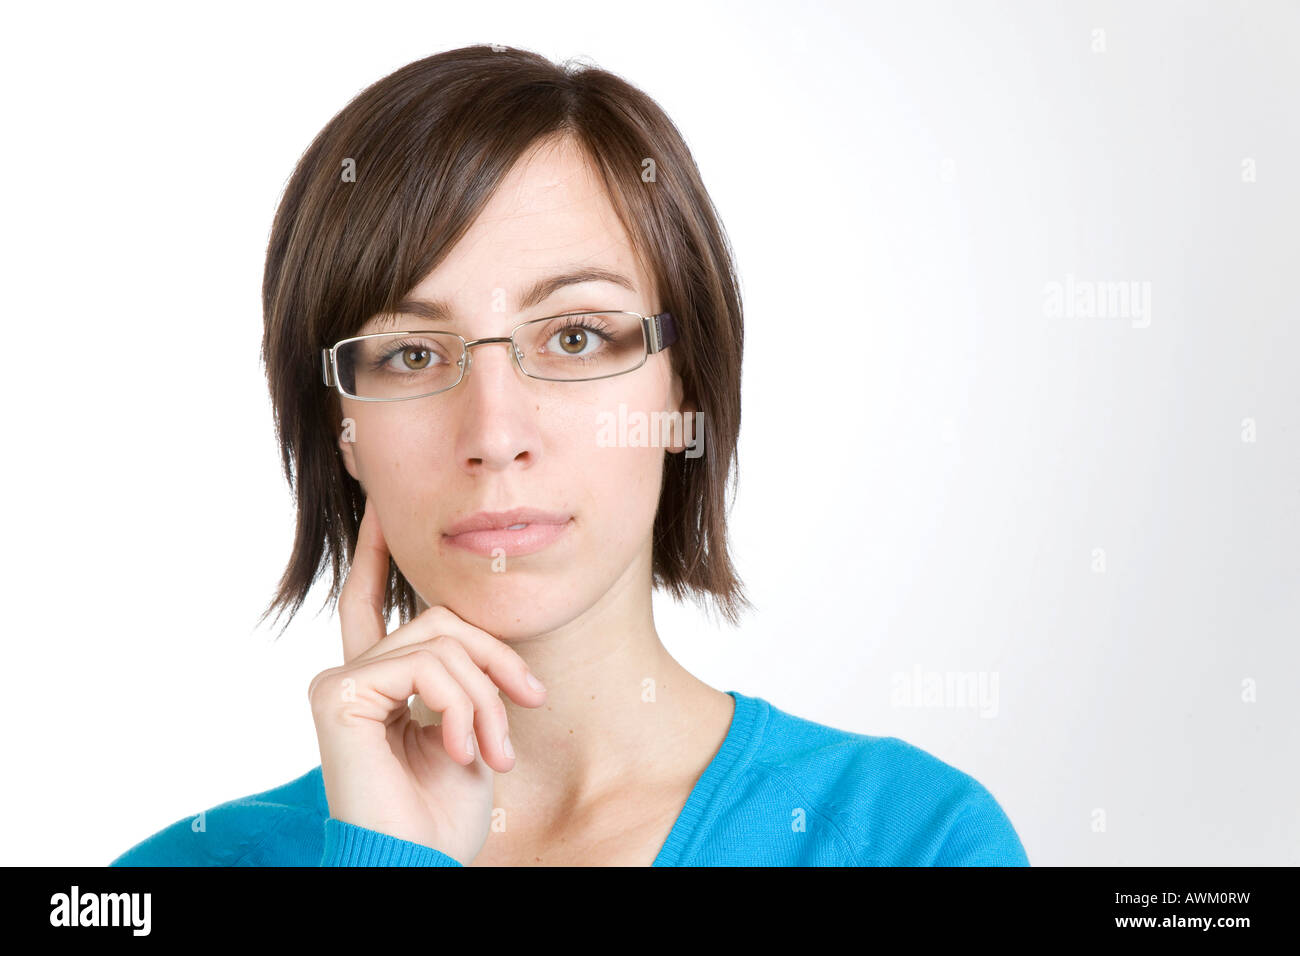 Young woman wearing glasses Stock Photo